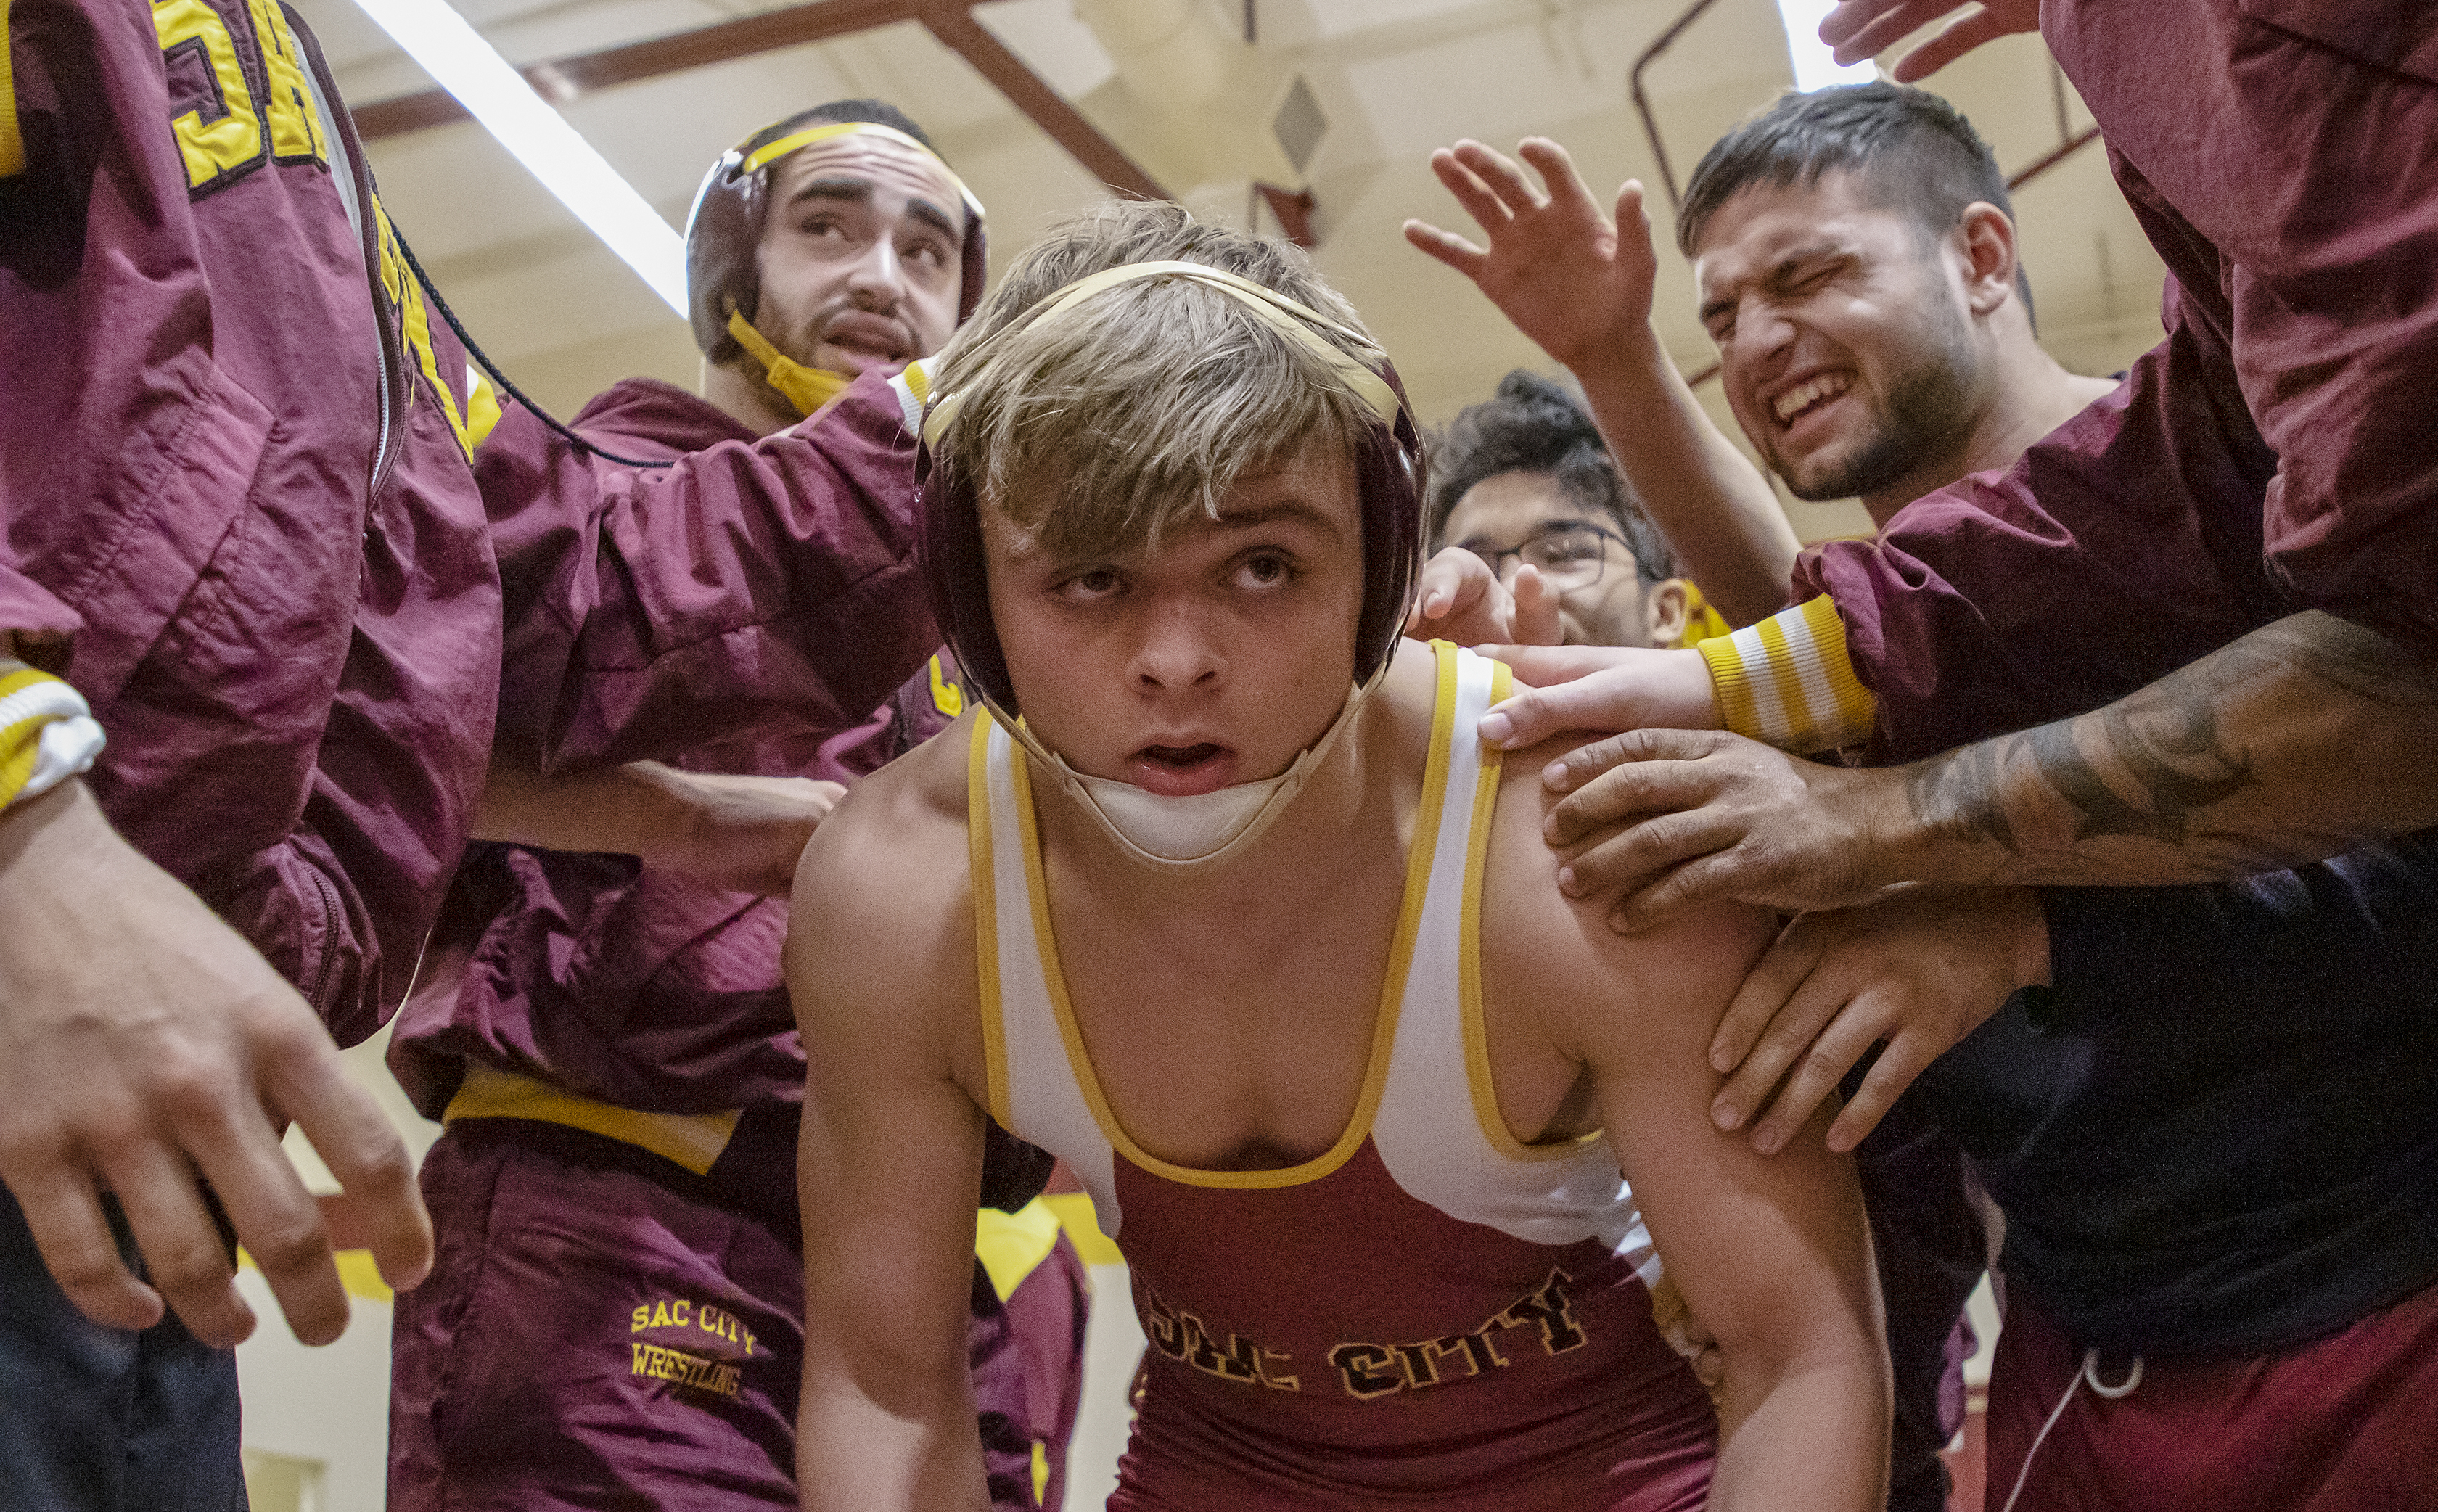 City+College+Liam+Leckie%2C+174-pound+weight%2C+in+the+huddle+before+his+match+against+Lassen+Community+College+Tyler+Moore+in+the+North+Gym+at+City+College+Wednesday%2C+Oct.+9%2C+2019.+Leckie+wins+by+pin+in+3%3A10.+City+College+beat+Lassen+College+29%E2%80%9313.+%28Sara+Nevis%2Fsnevis.express%40gmail.com%29